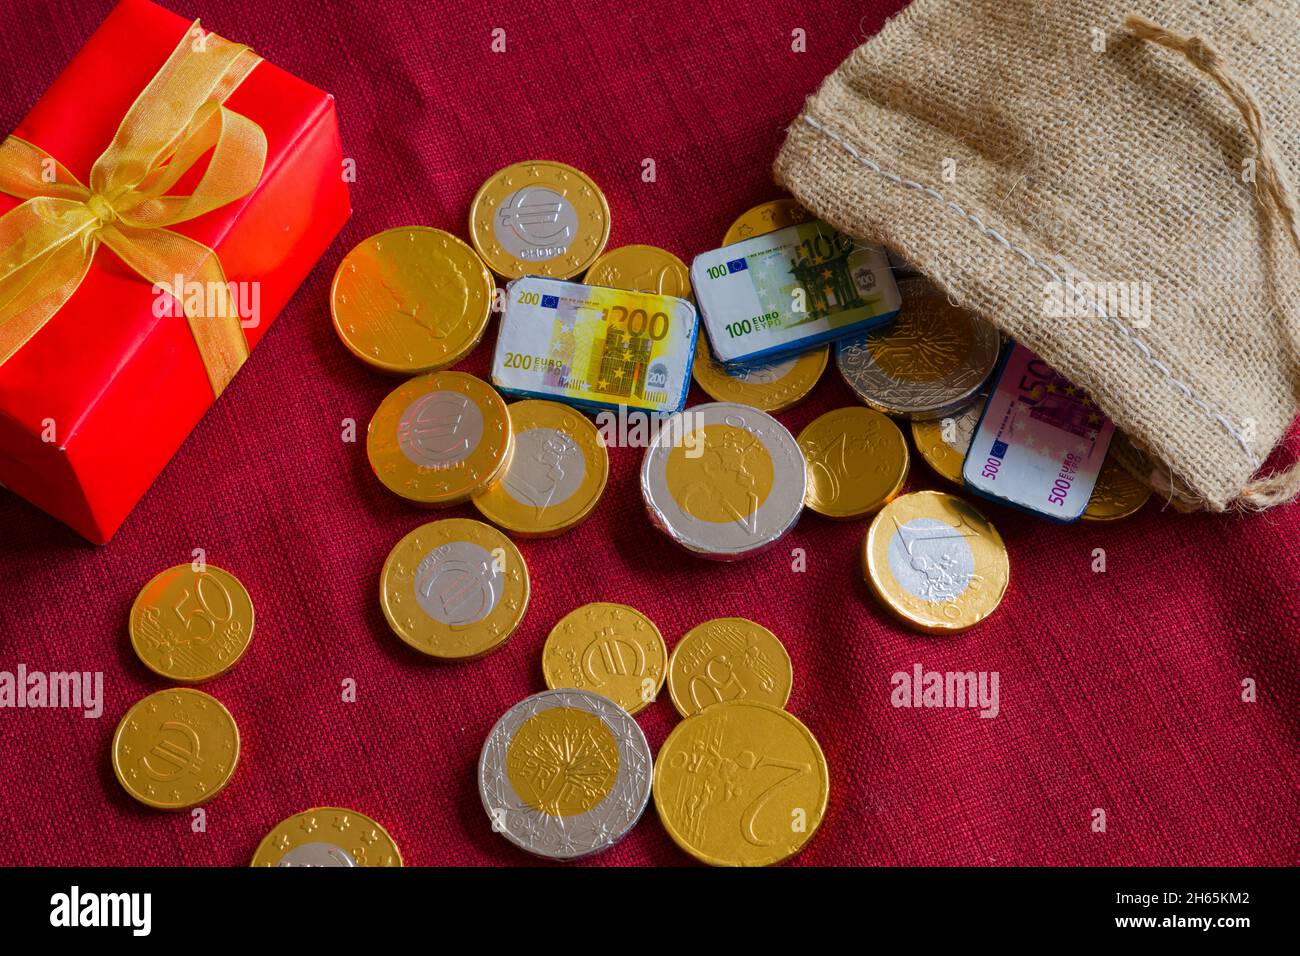 Chocolate coins scattered around, a sack and a present. Concept for expensive holidays like Christmas and Sinterklaas Stock Photo